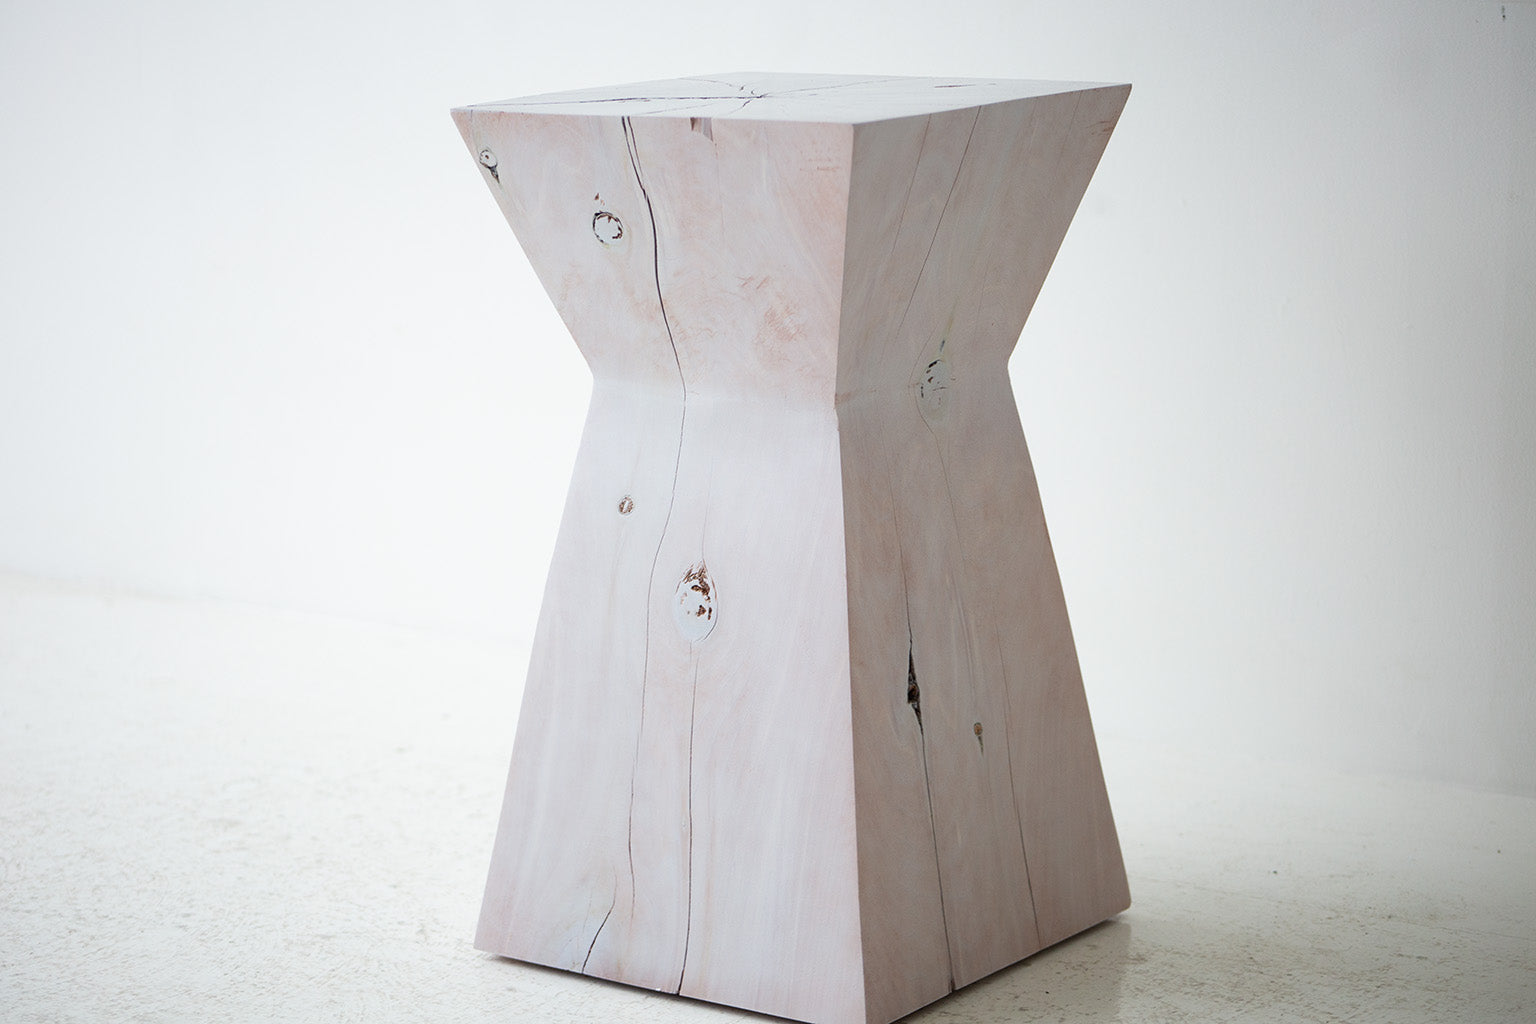 Sculpted Stump Table - The Sol - 2222